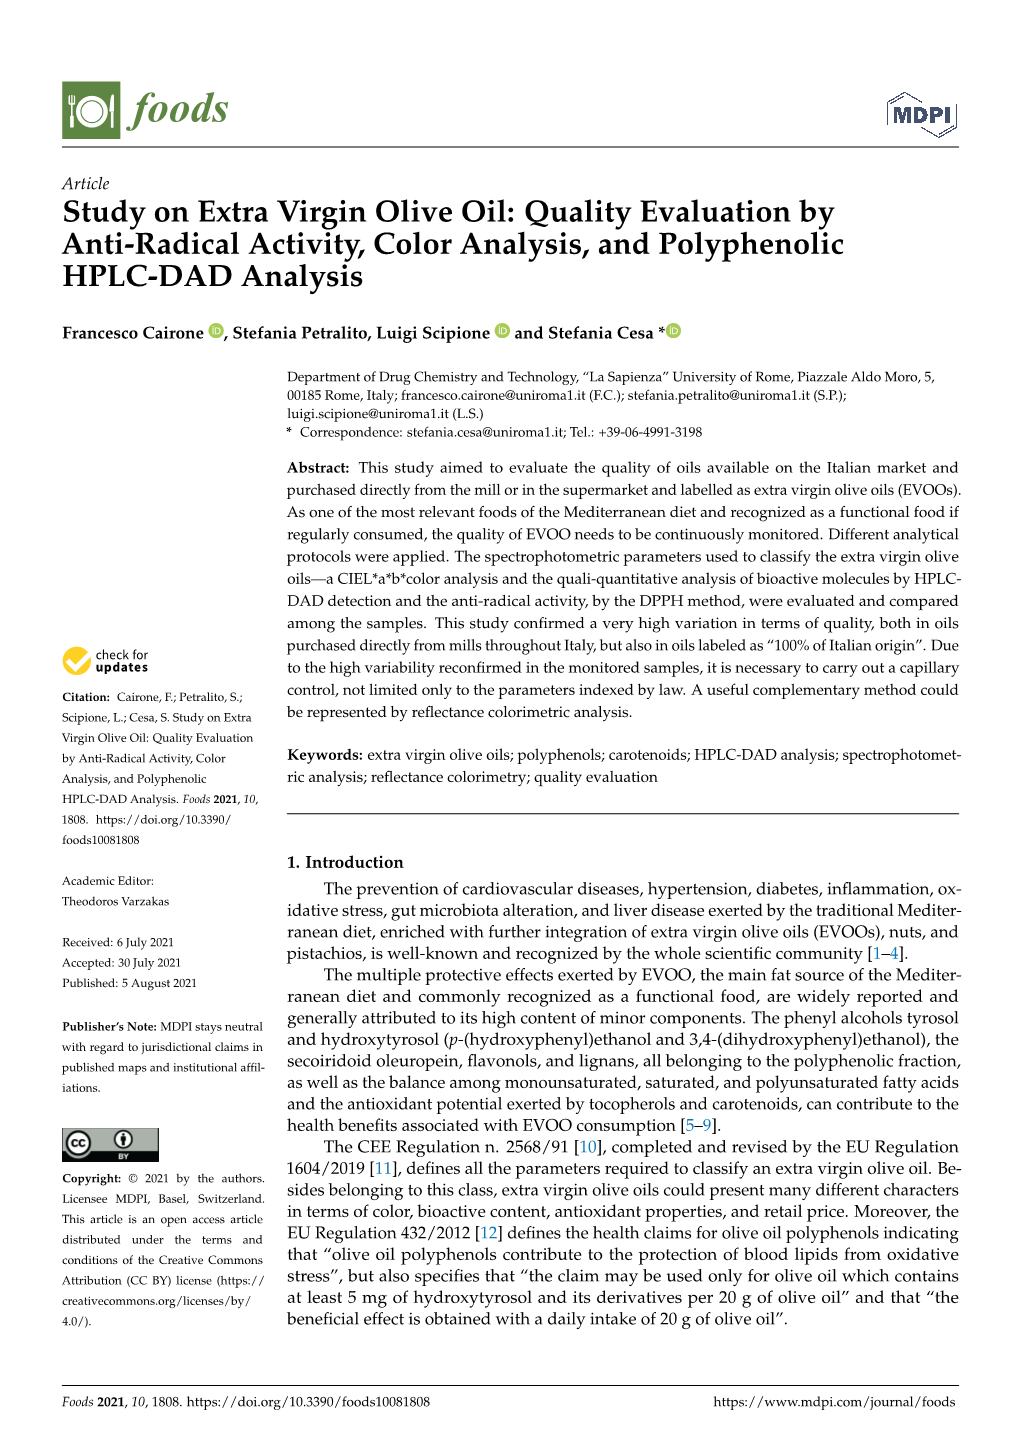 Study on Extra Virgin Olive Oil: Quality Evaluation by Anti-Radical Activity, Color Analysis, and Polyphenolic HPLC-DAD Analysis